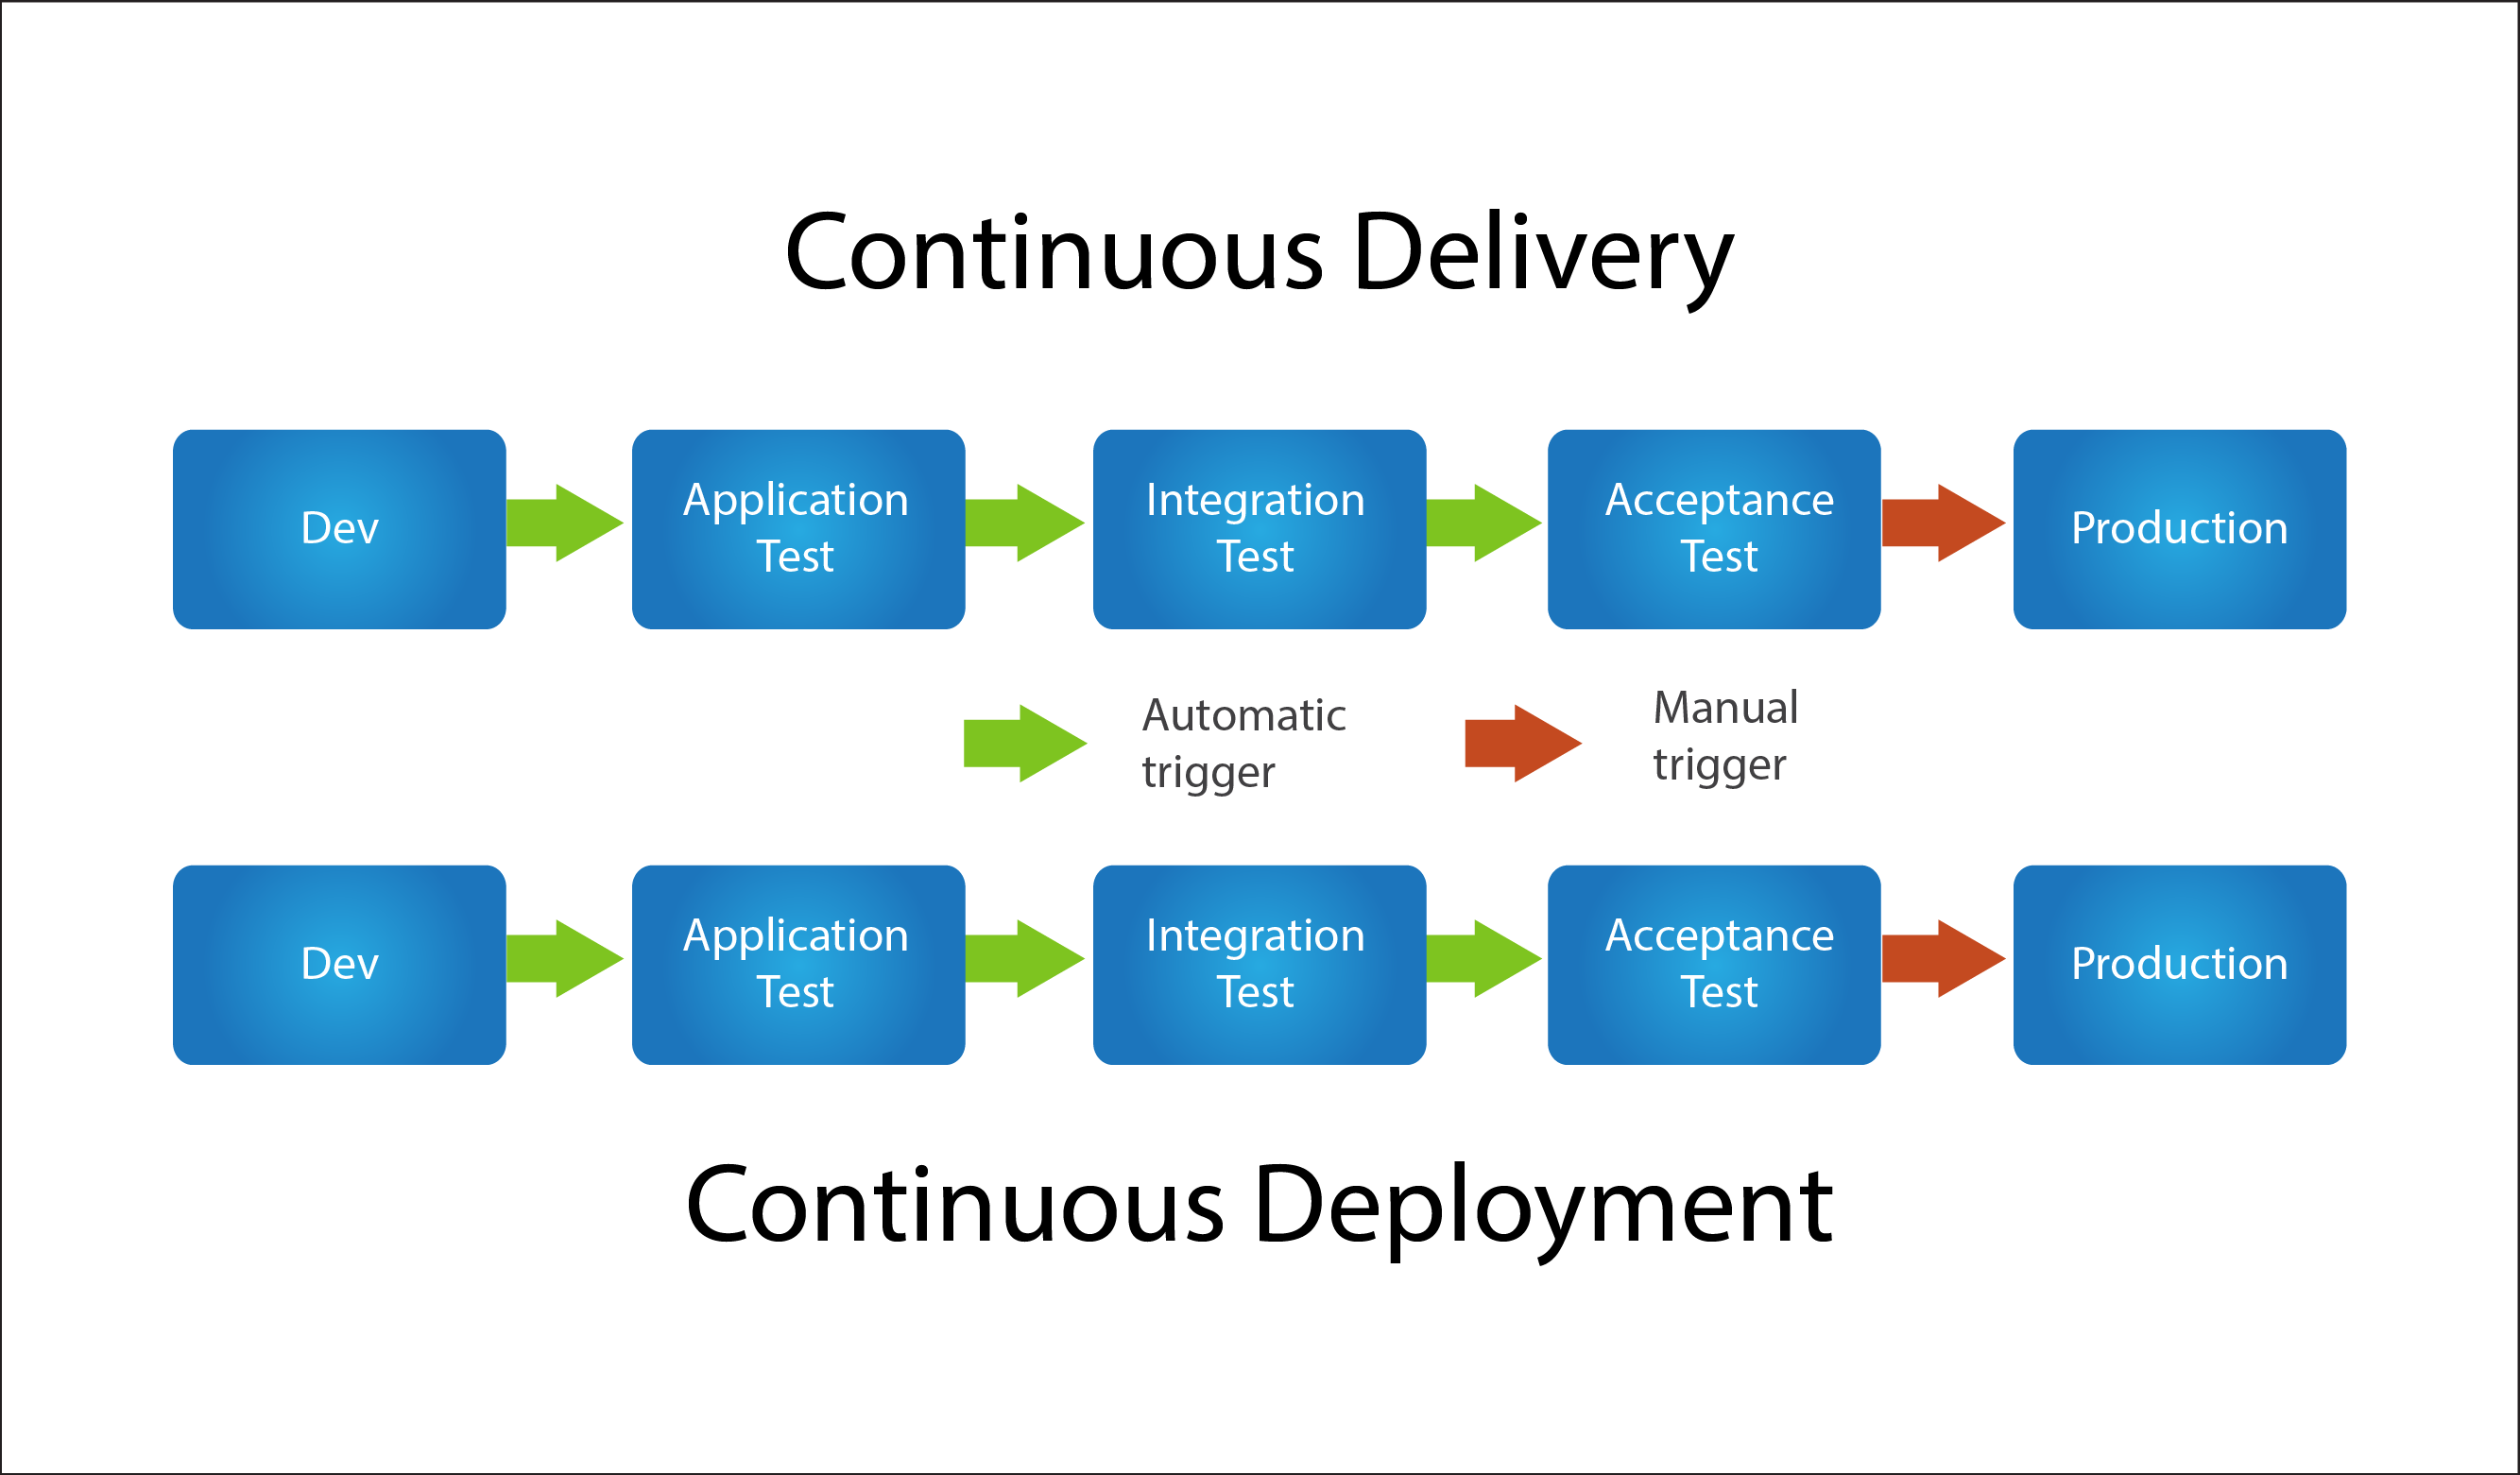 Continuous Delivery and Continuous Deployment